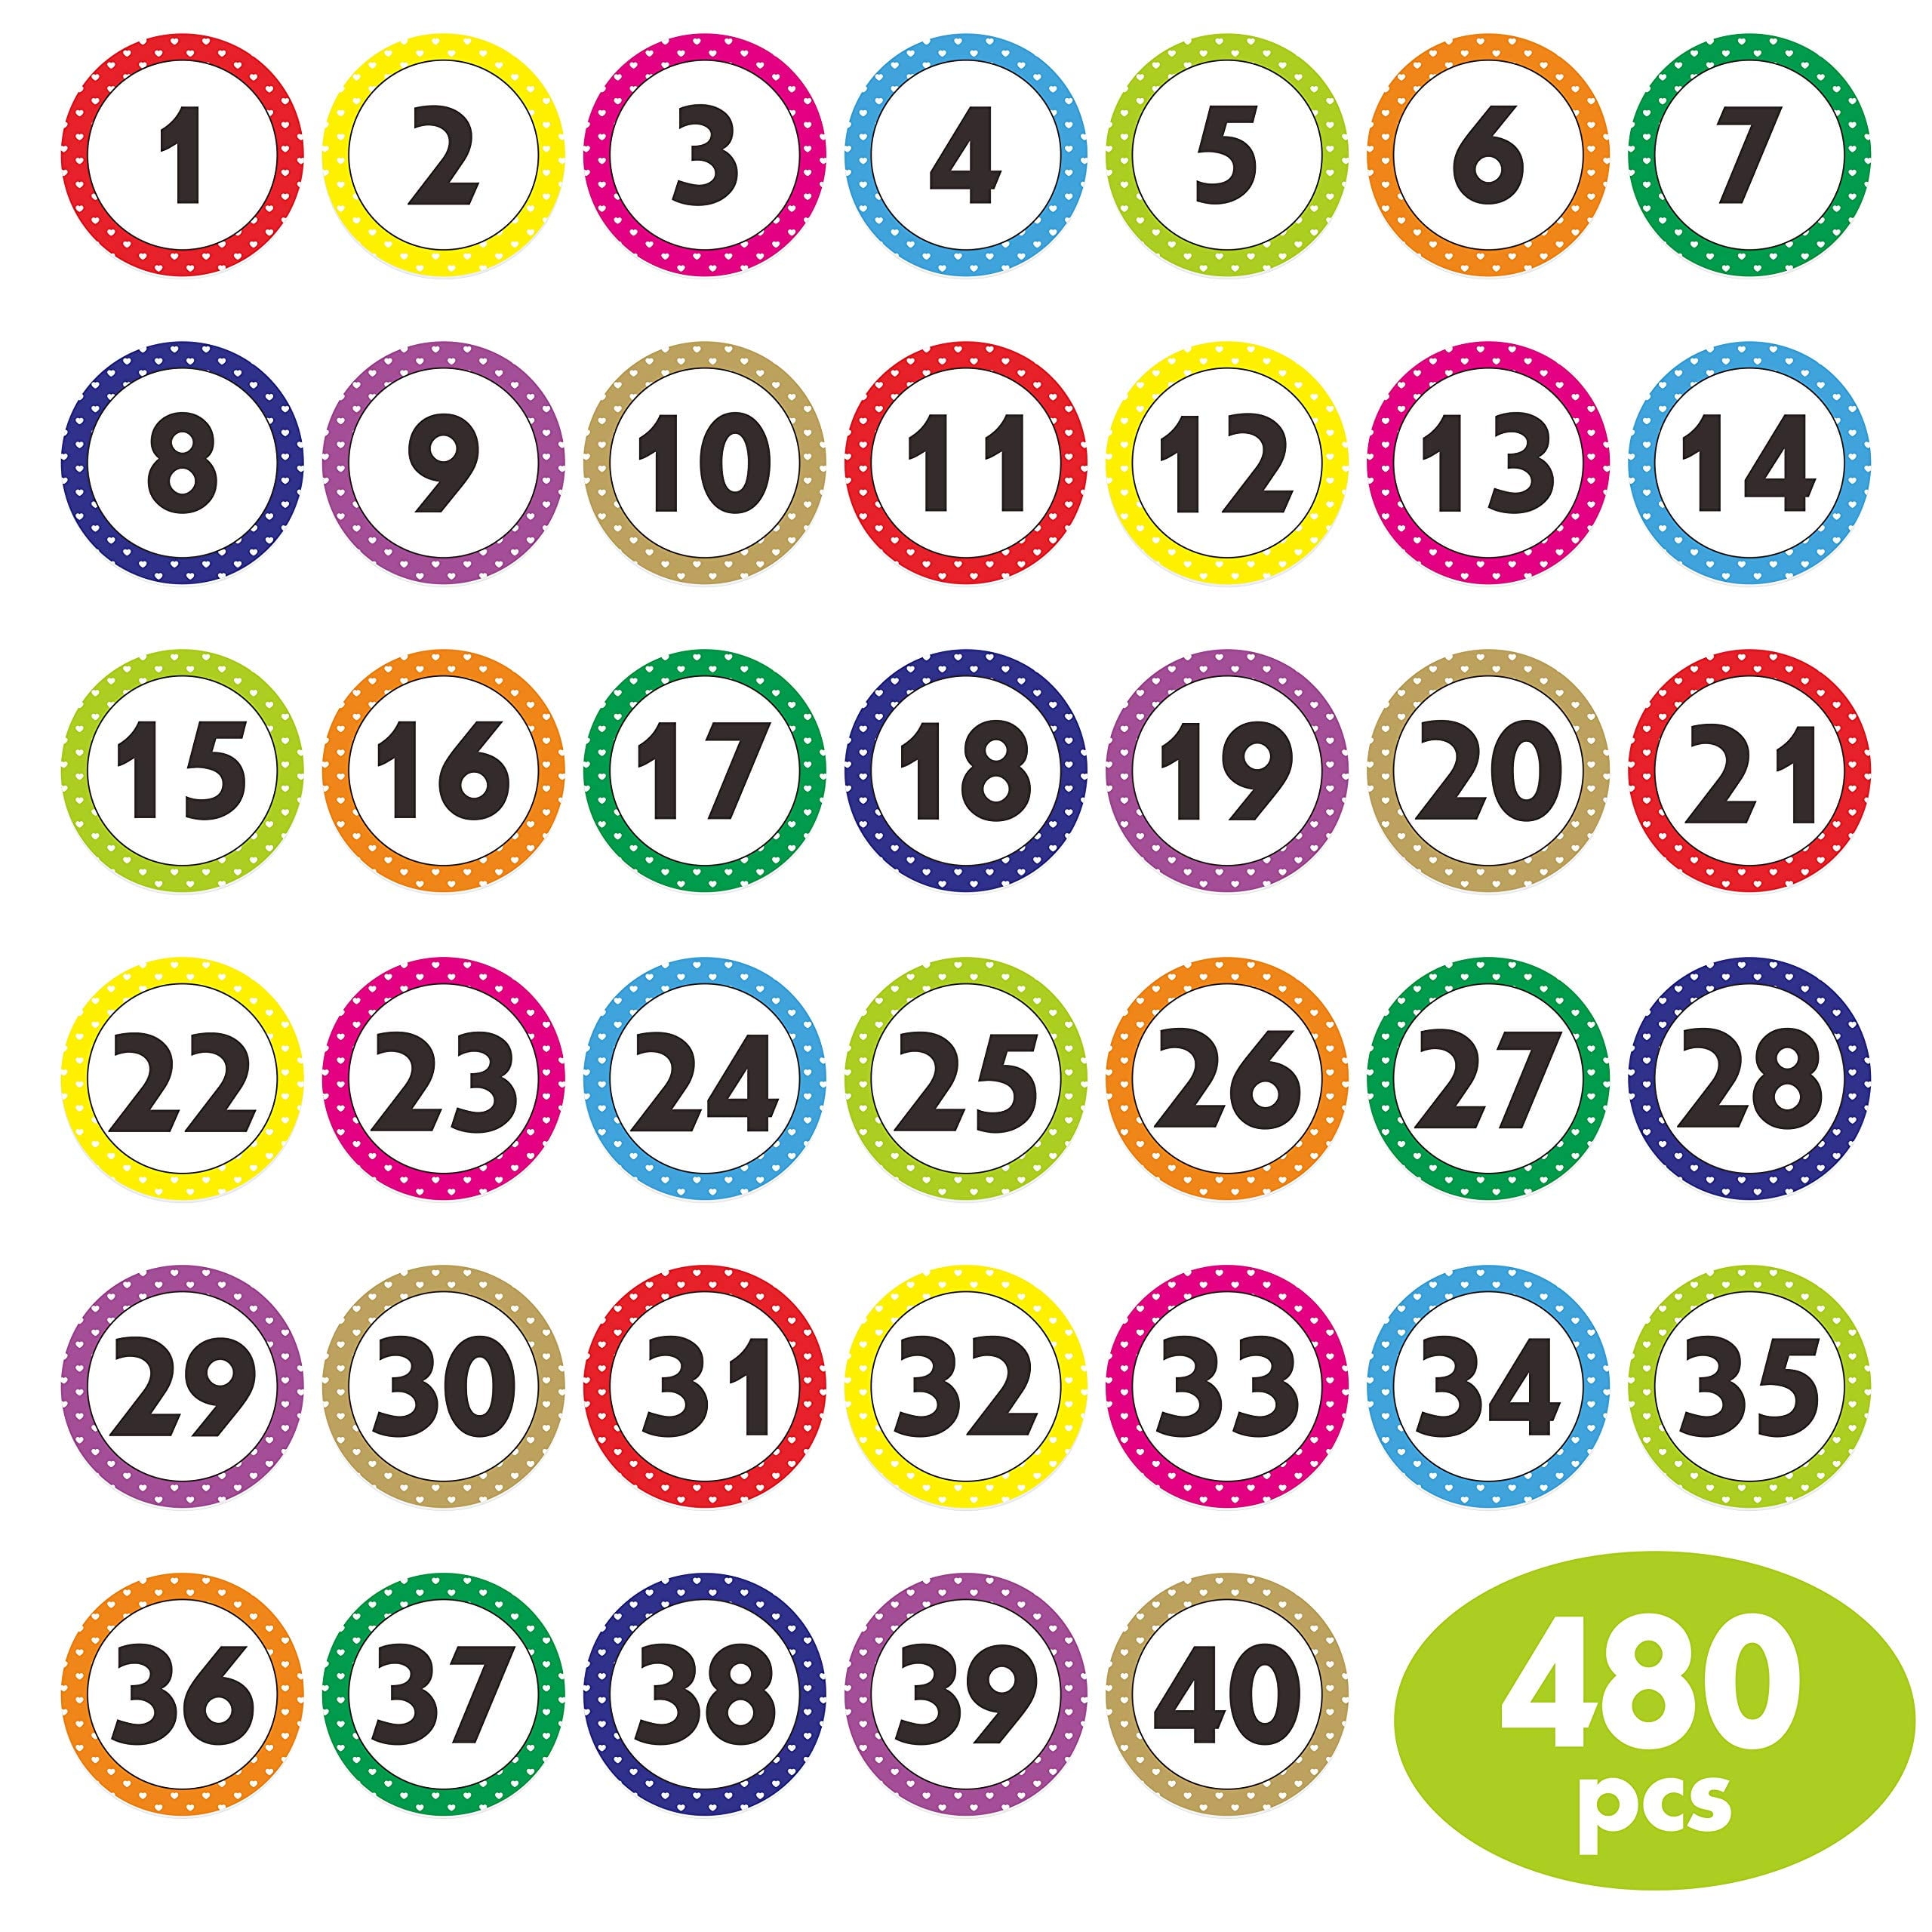 480 PCS Polka Dot 1 40 Numbers Stickers For Office Classroom Organizing Each Measures 1 In Diameter Walmart